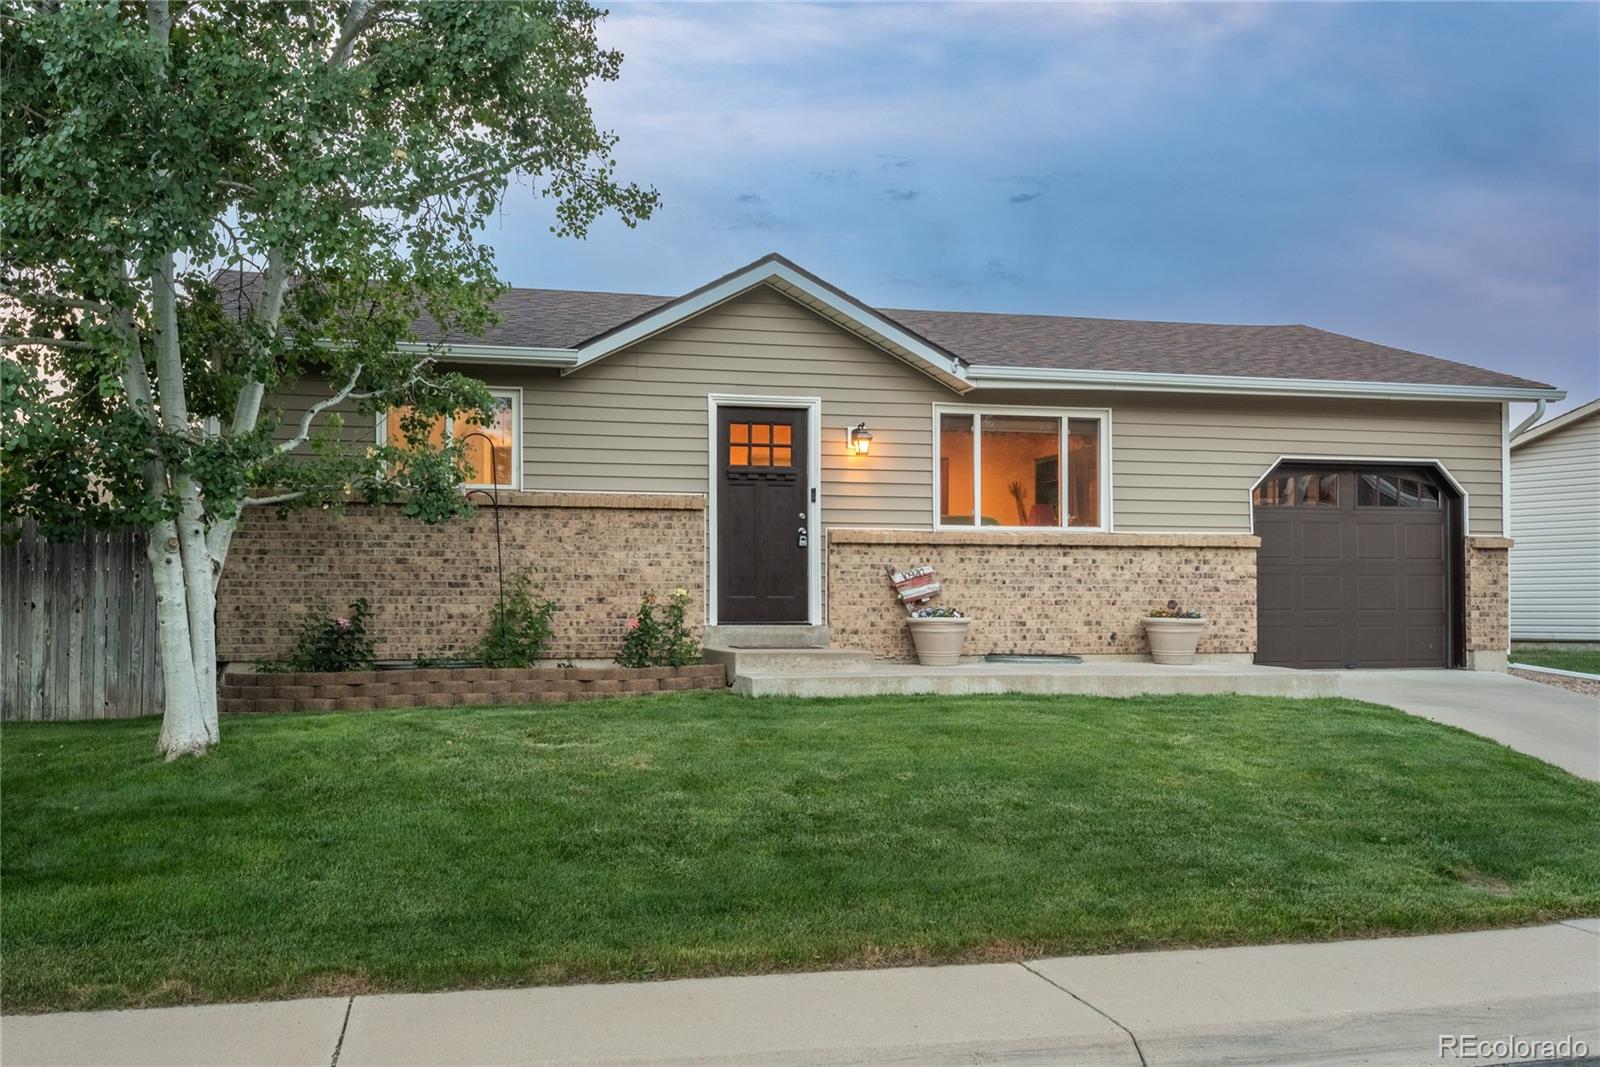 Report Image for 10920  Jay Street,Westminster, Colorado